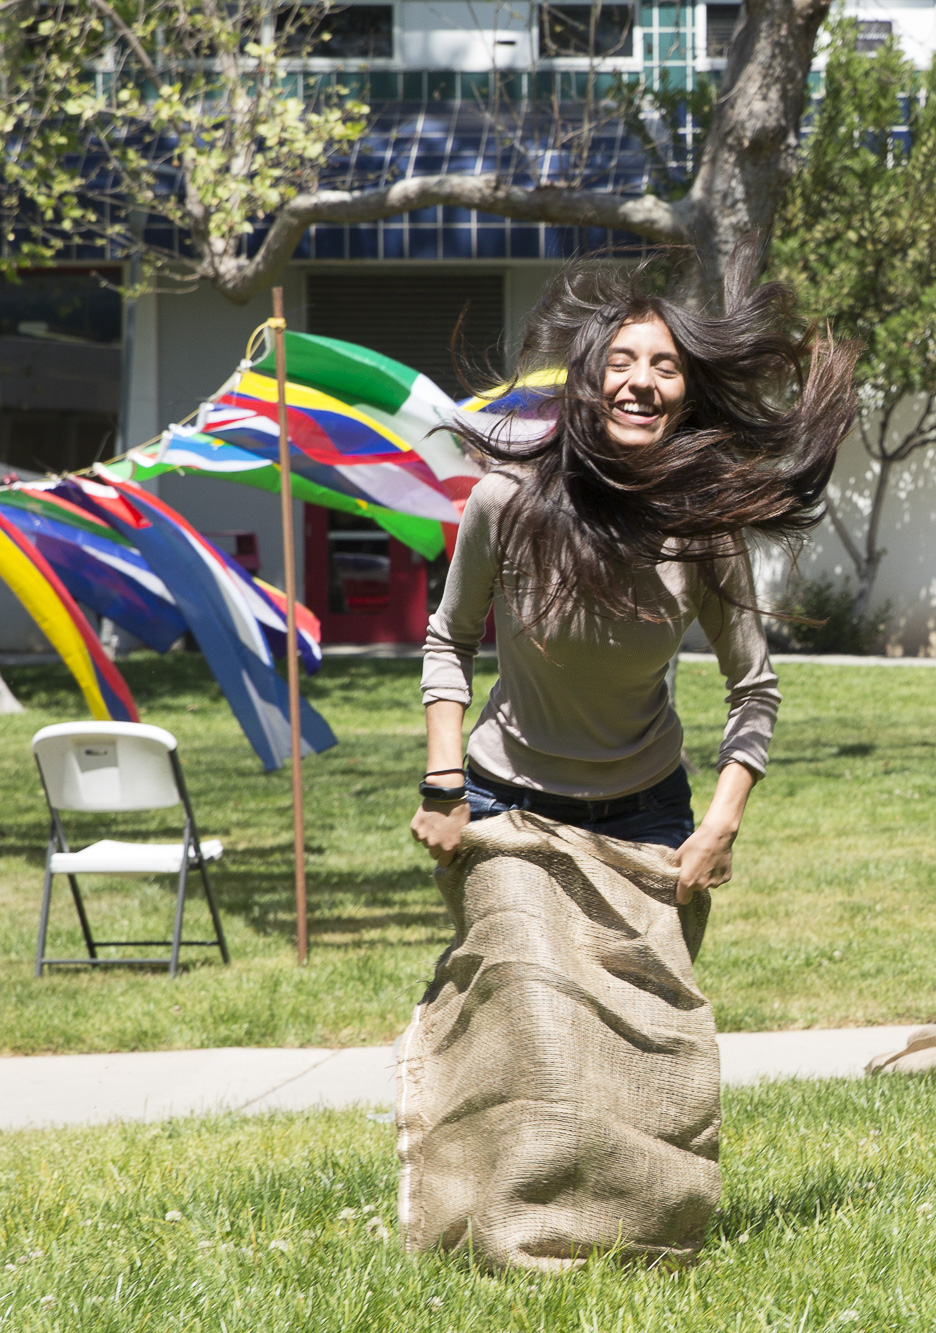  The Cinco De Mayo celebration event that was hosted by the Santa Monica College (SMC) club “Adelante” had many activities to take part in, including a potato sack race that took place in front of the SMC clock tower on the main campus in Santa Monic